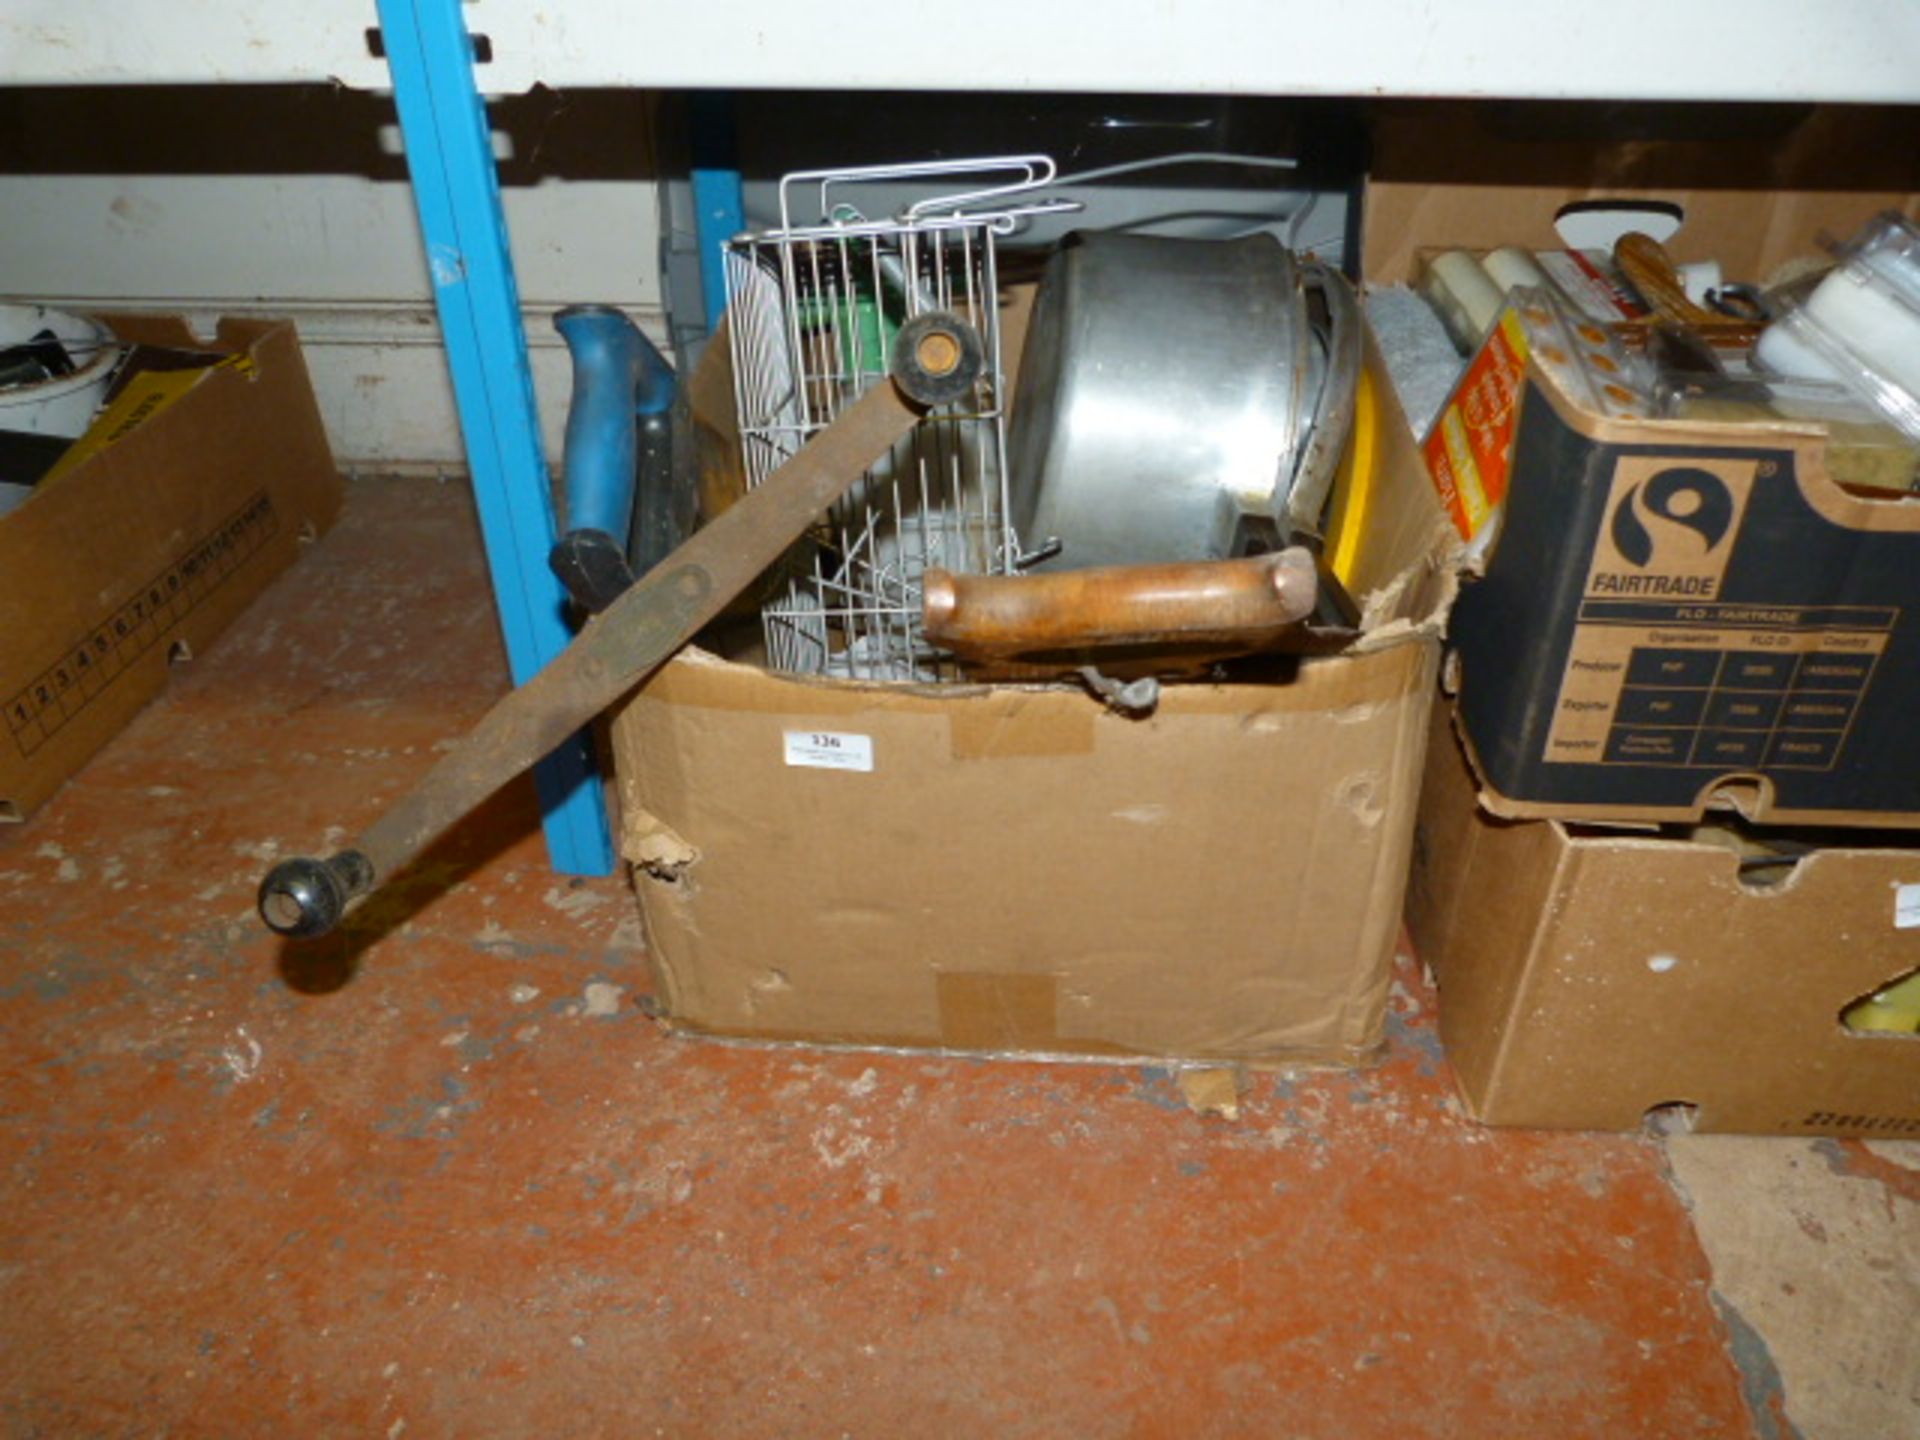 Box Containing Rattrap, Pressure Cookers, Saw, etc.